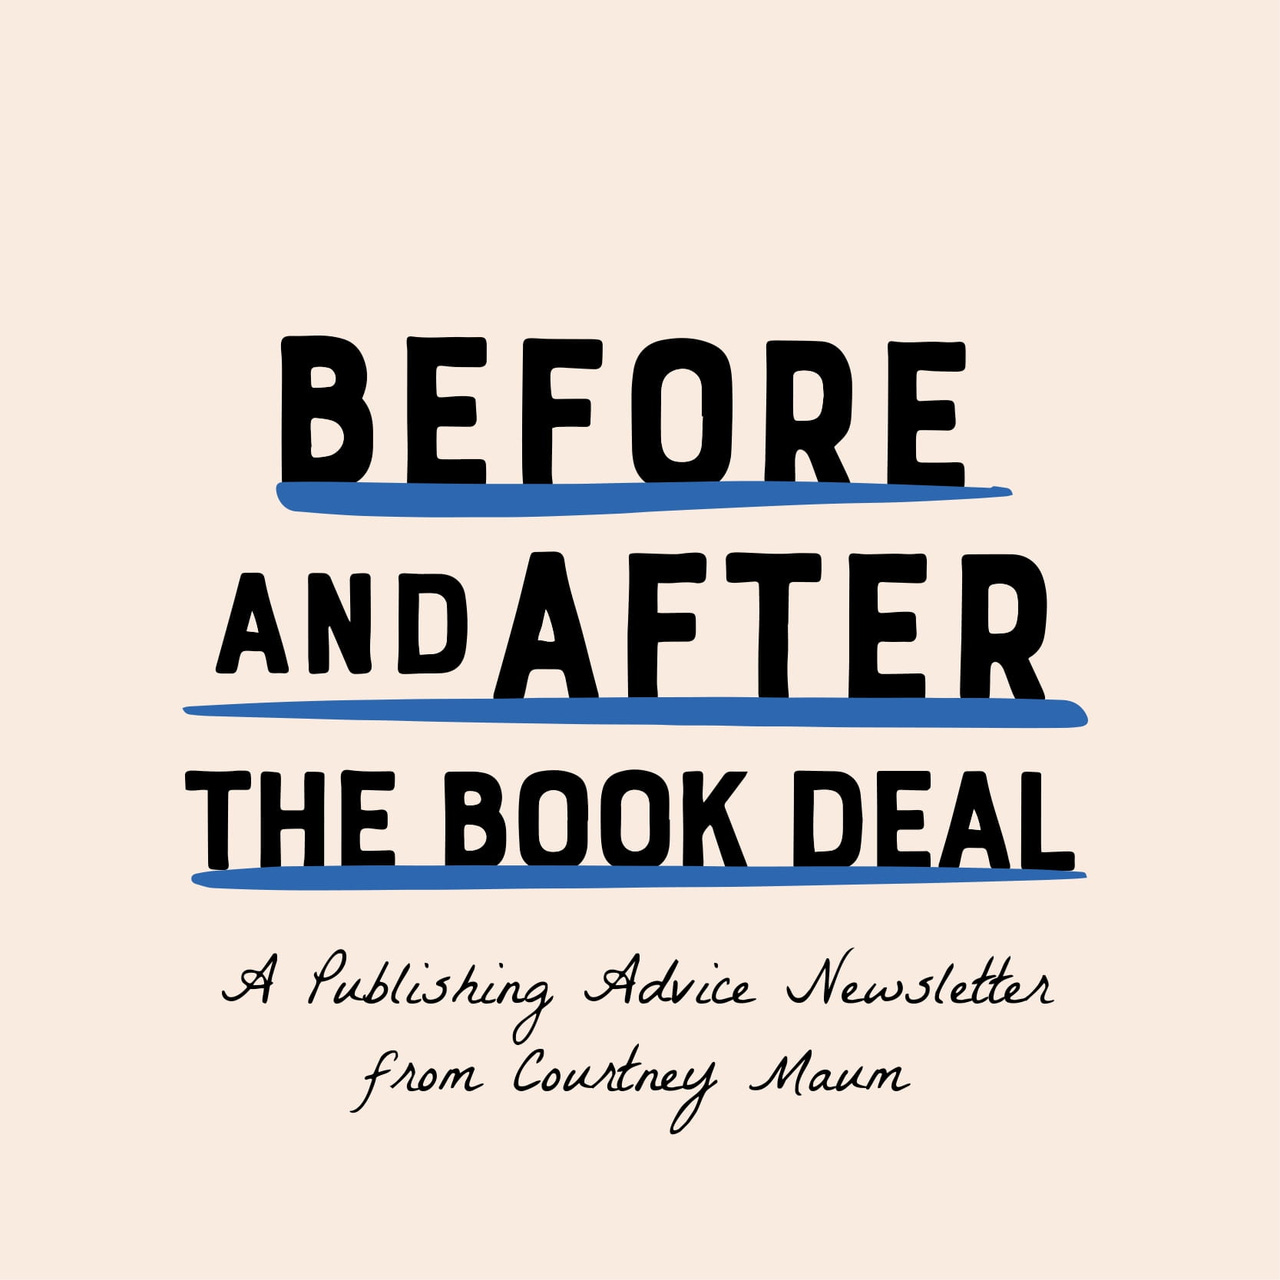 Artwork for Before and After the Book Deal